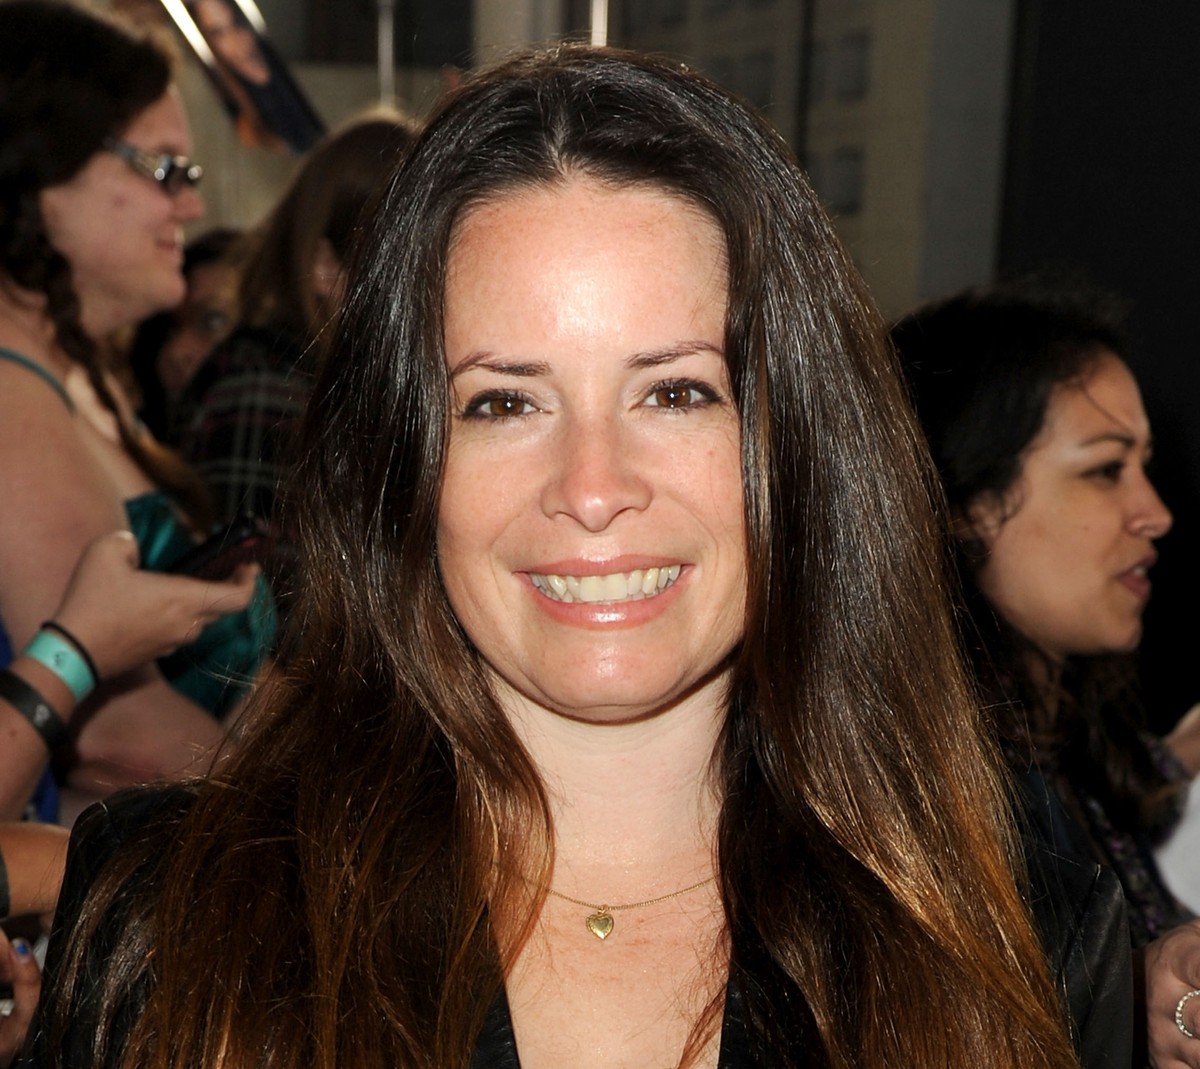 Pictures & Photos of Holly Marie Combs - IMDb